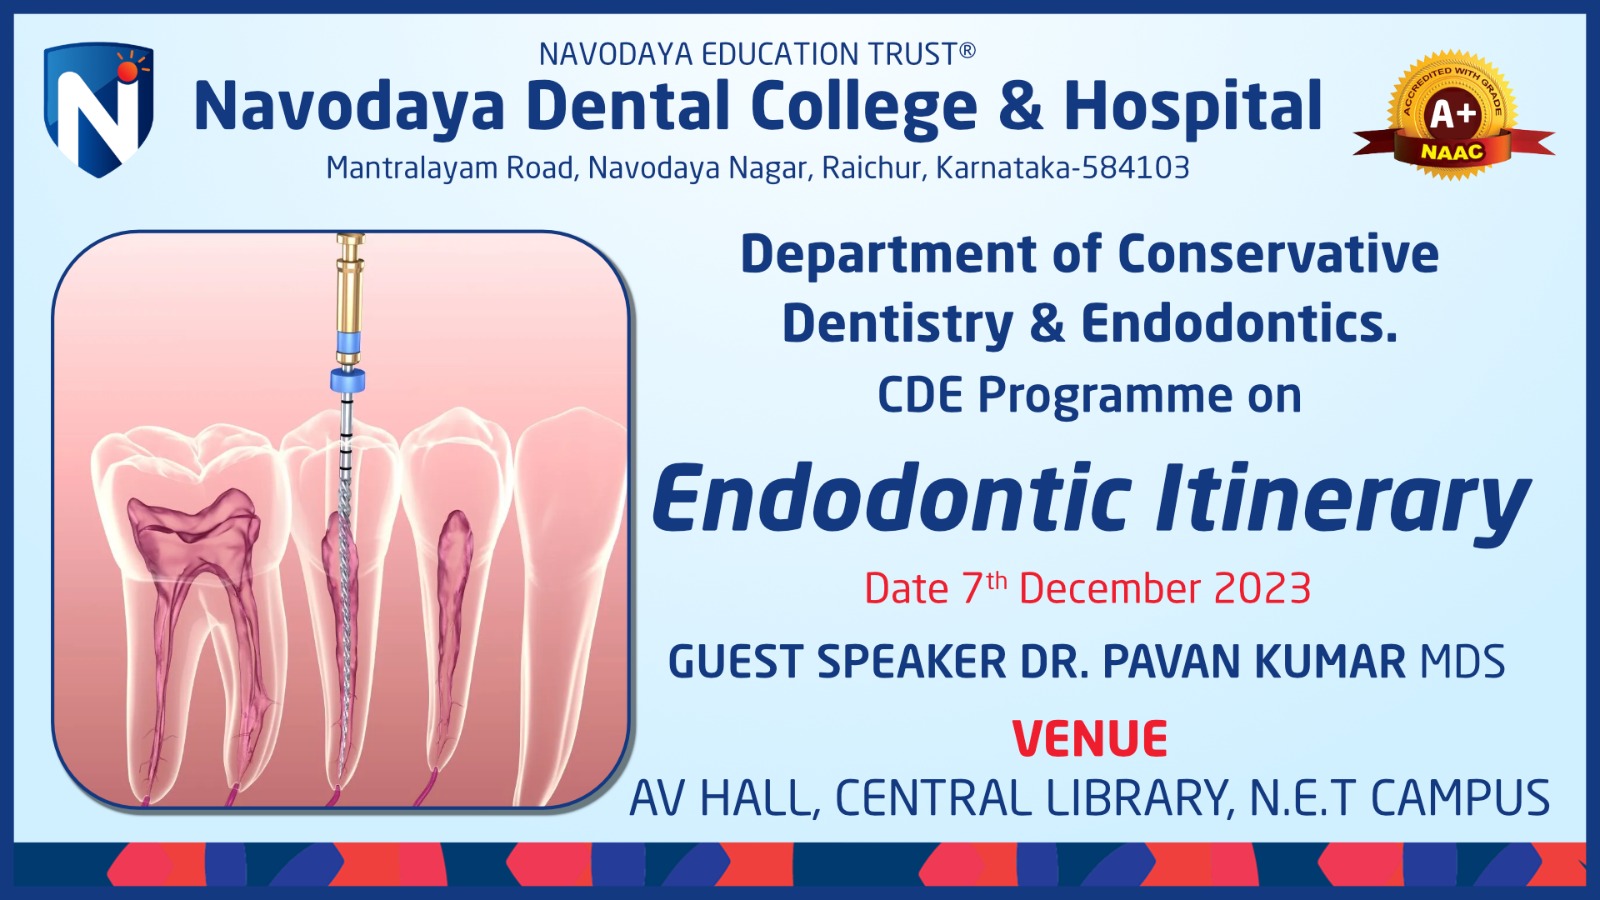 Navodaya Dental College -CDE programme on 7 December 2023 on the topic Endodontic Itinerary